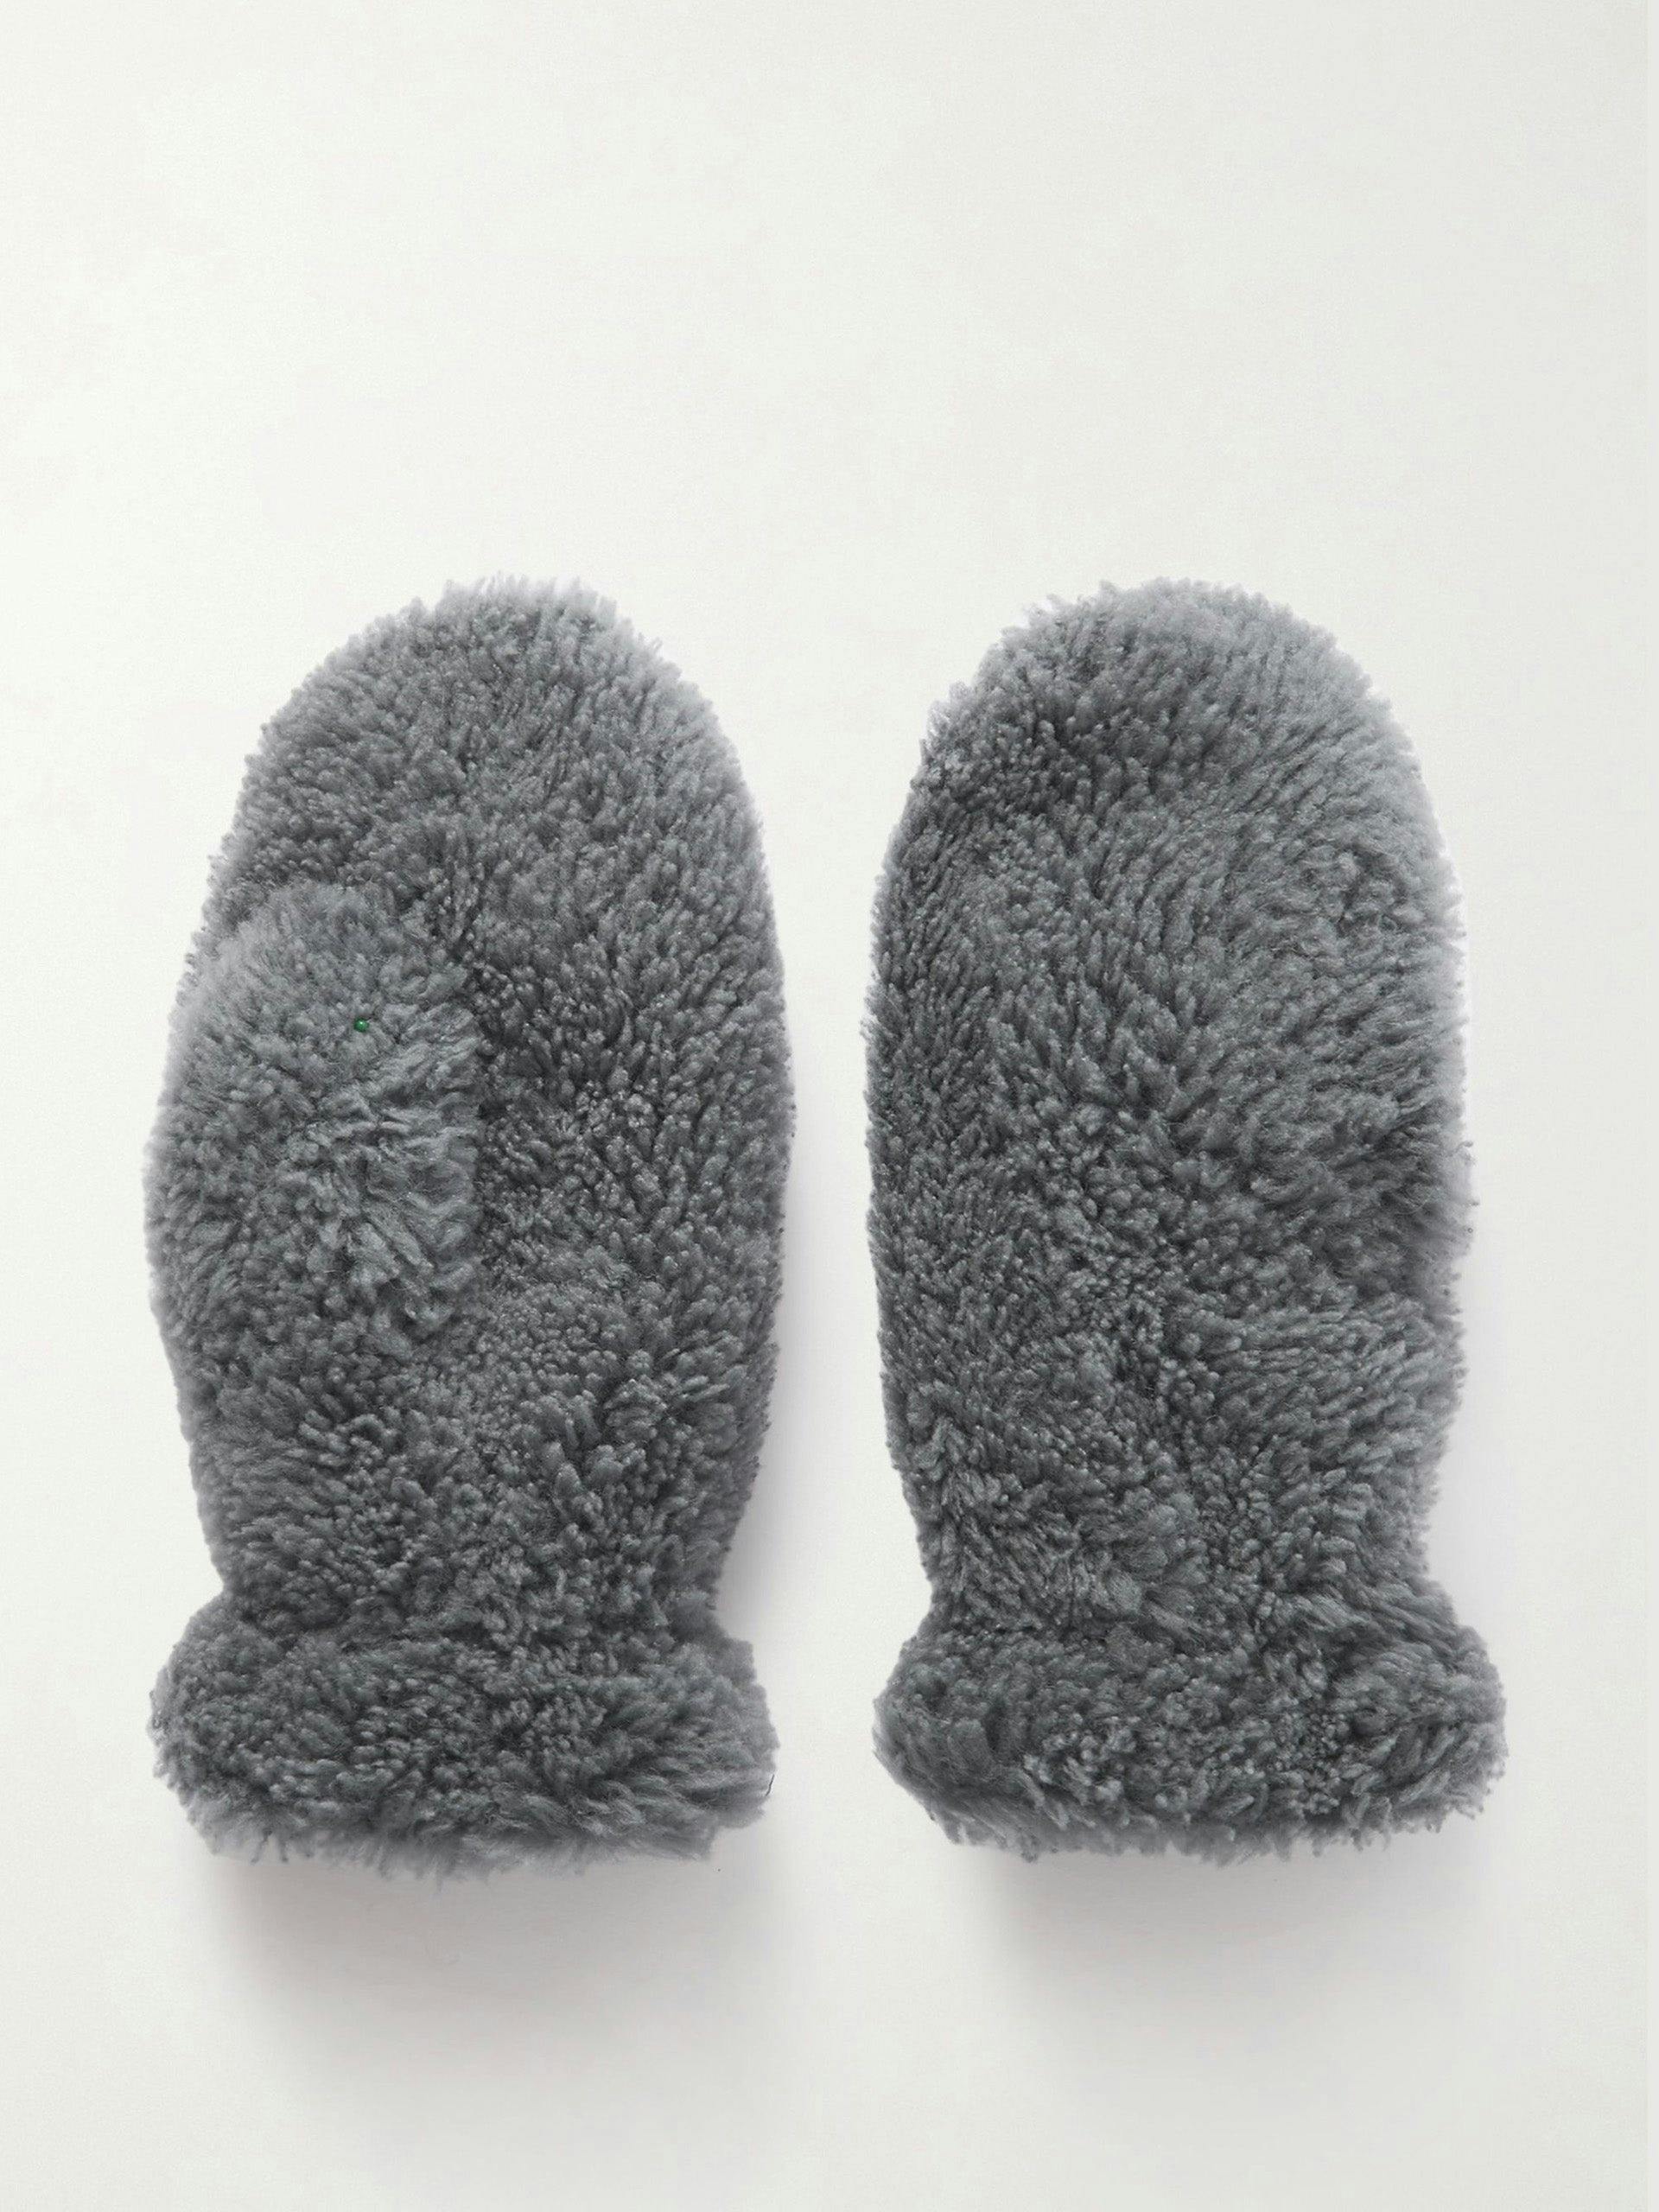 Padded shearling mittens